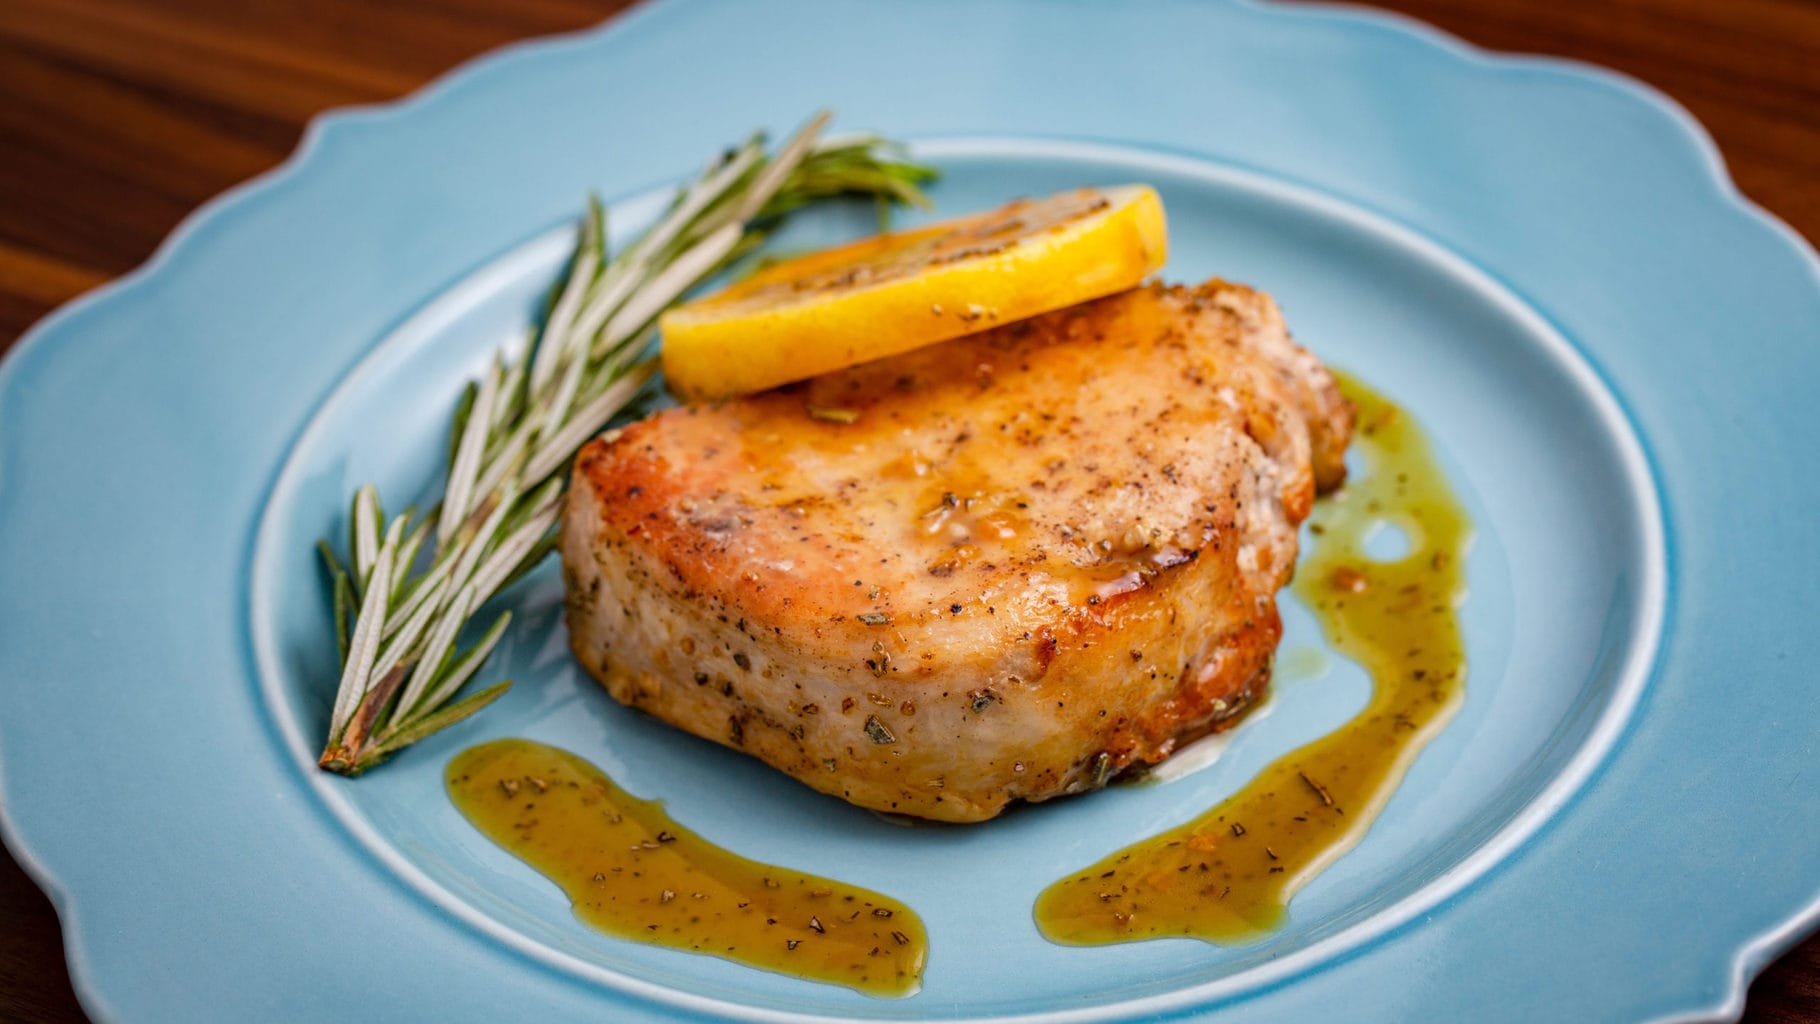 8 Pork Chop Recipes to Make Any Night of the Week - Just Cook by ButcherBox